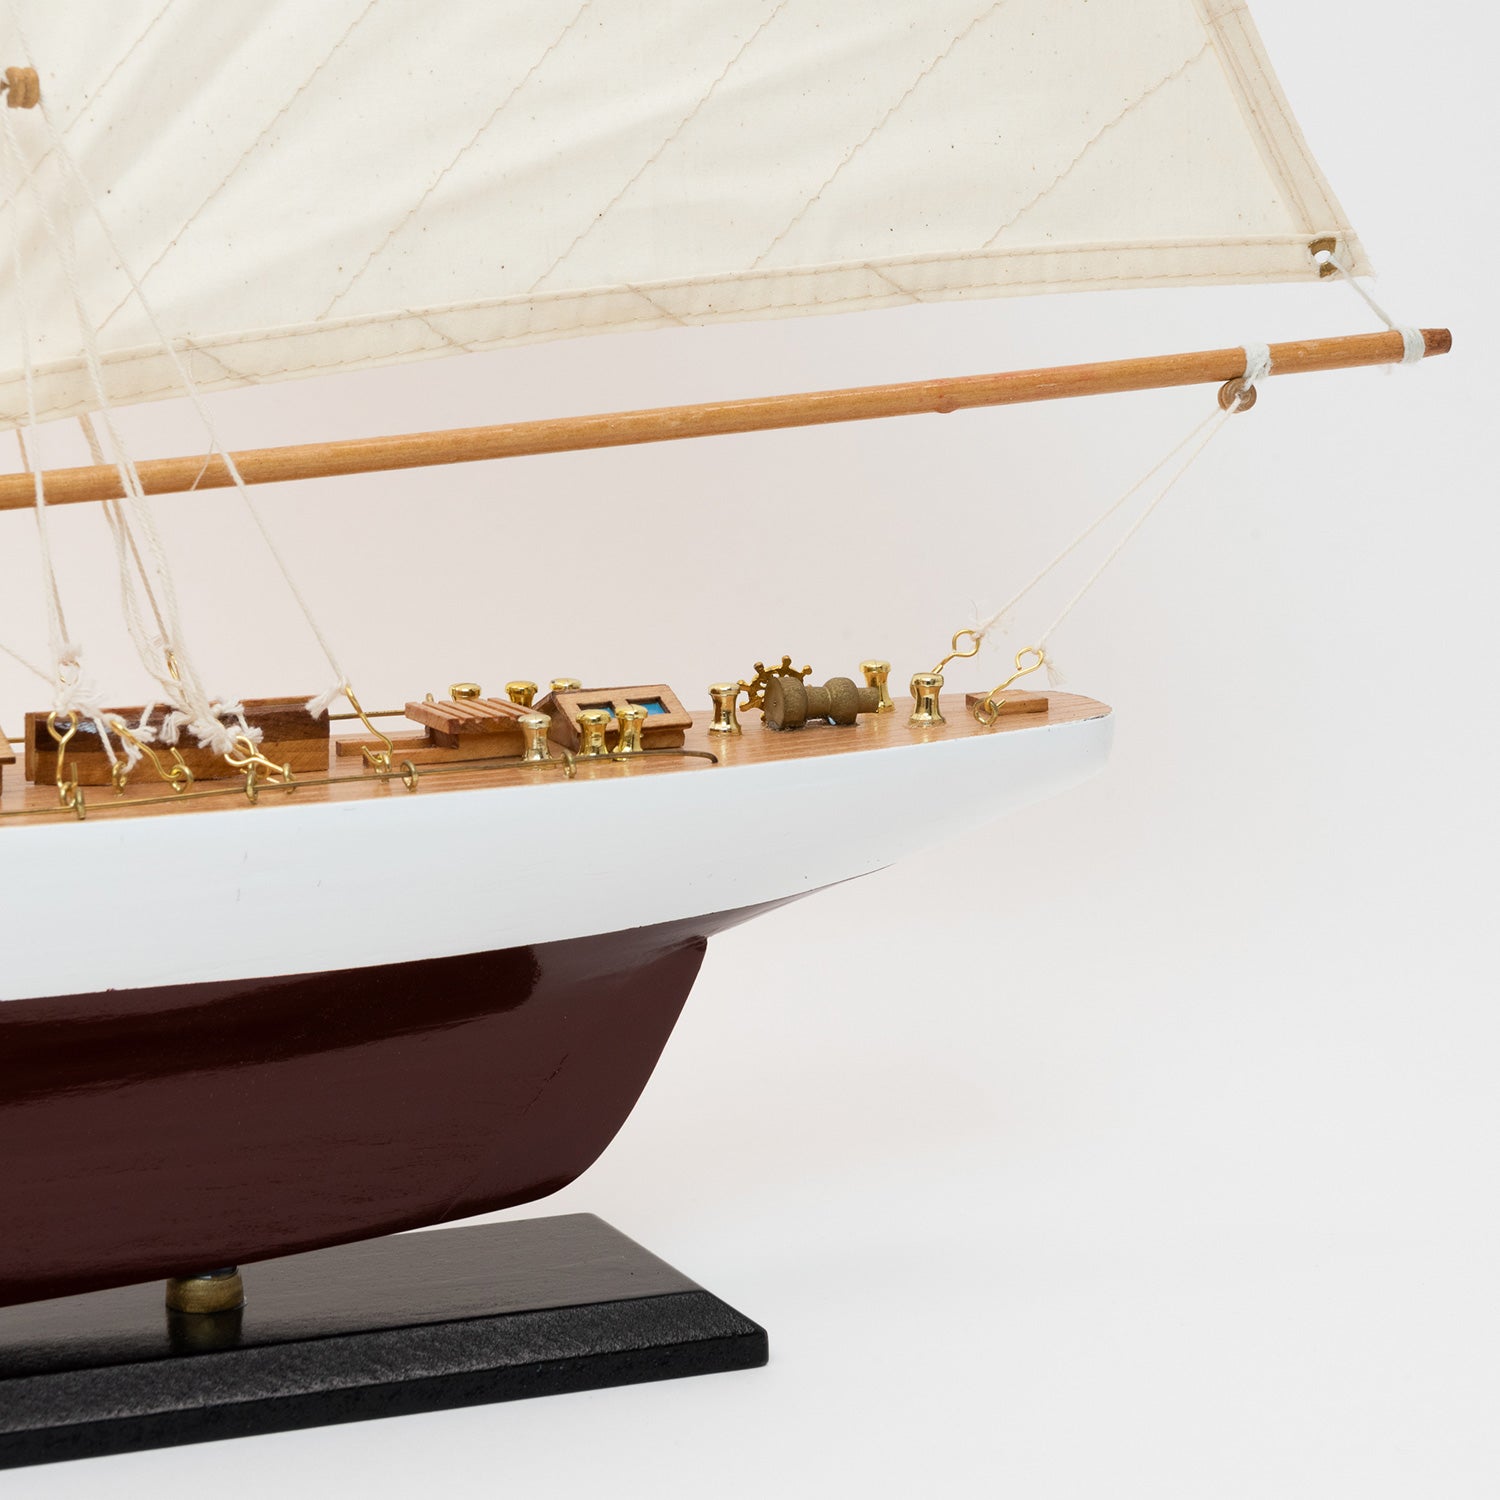 Close-up view of the model Colombia Yacht's stern with white and burgundy hull and cream coloured sails.